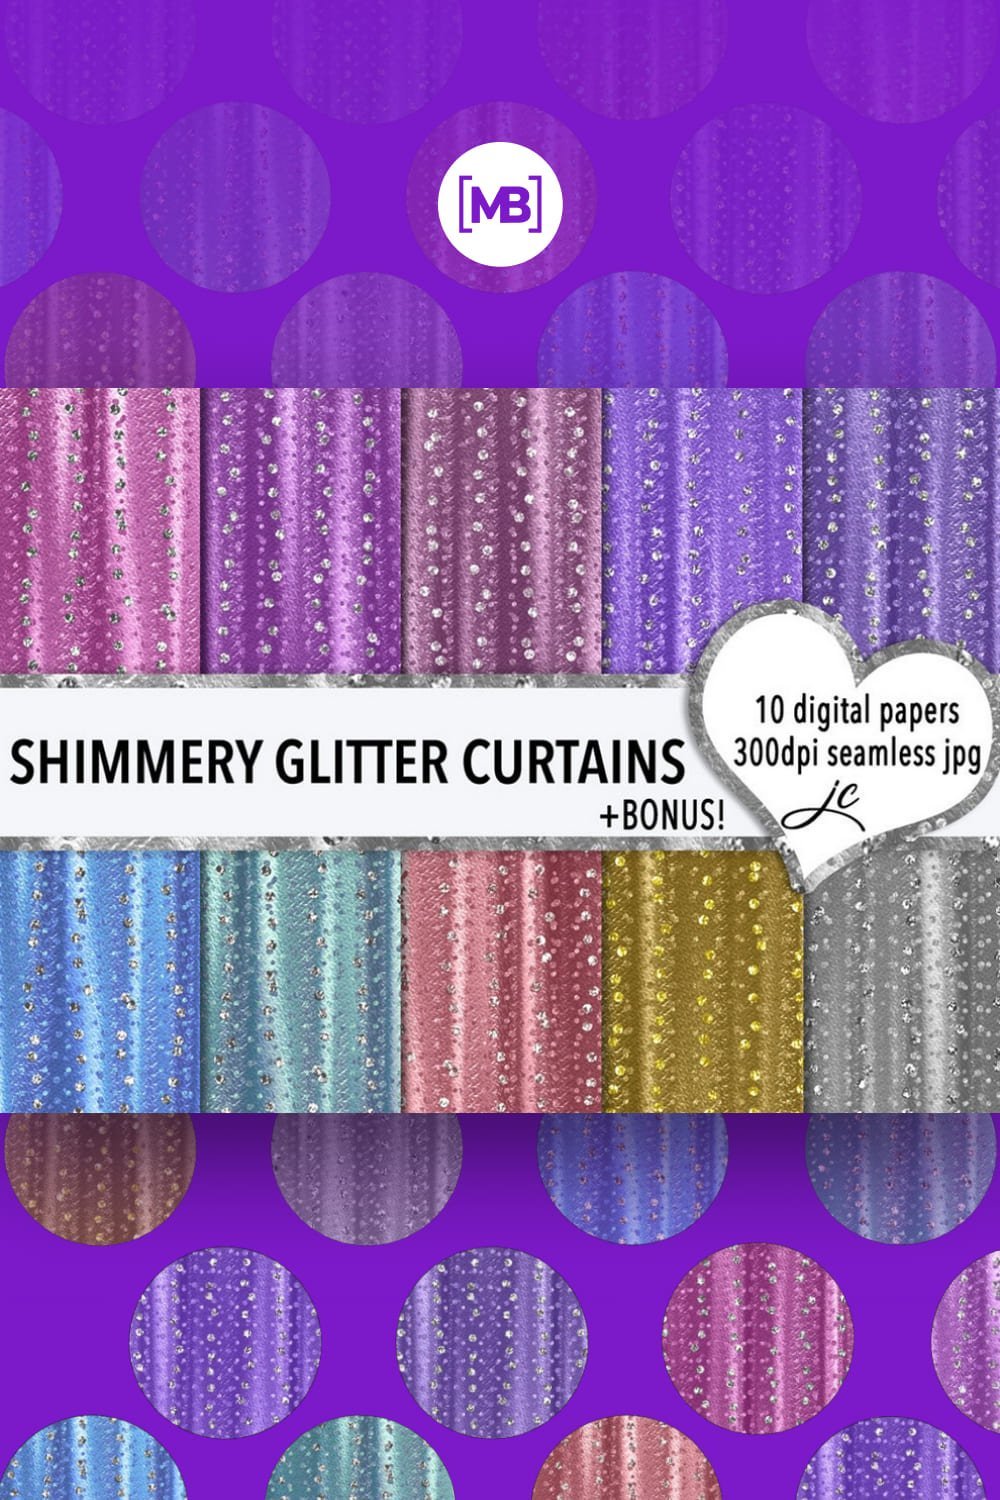 Shimmery glitter textures in different bright colors.